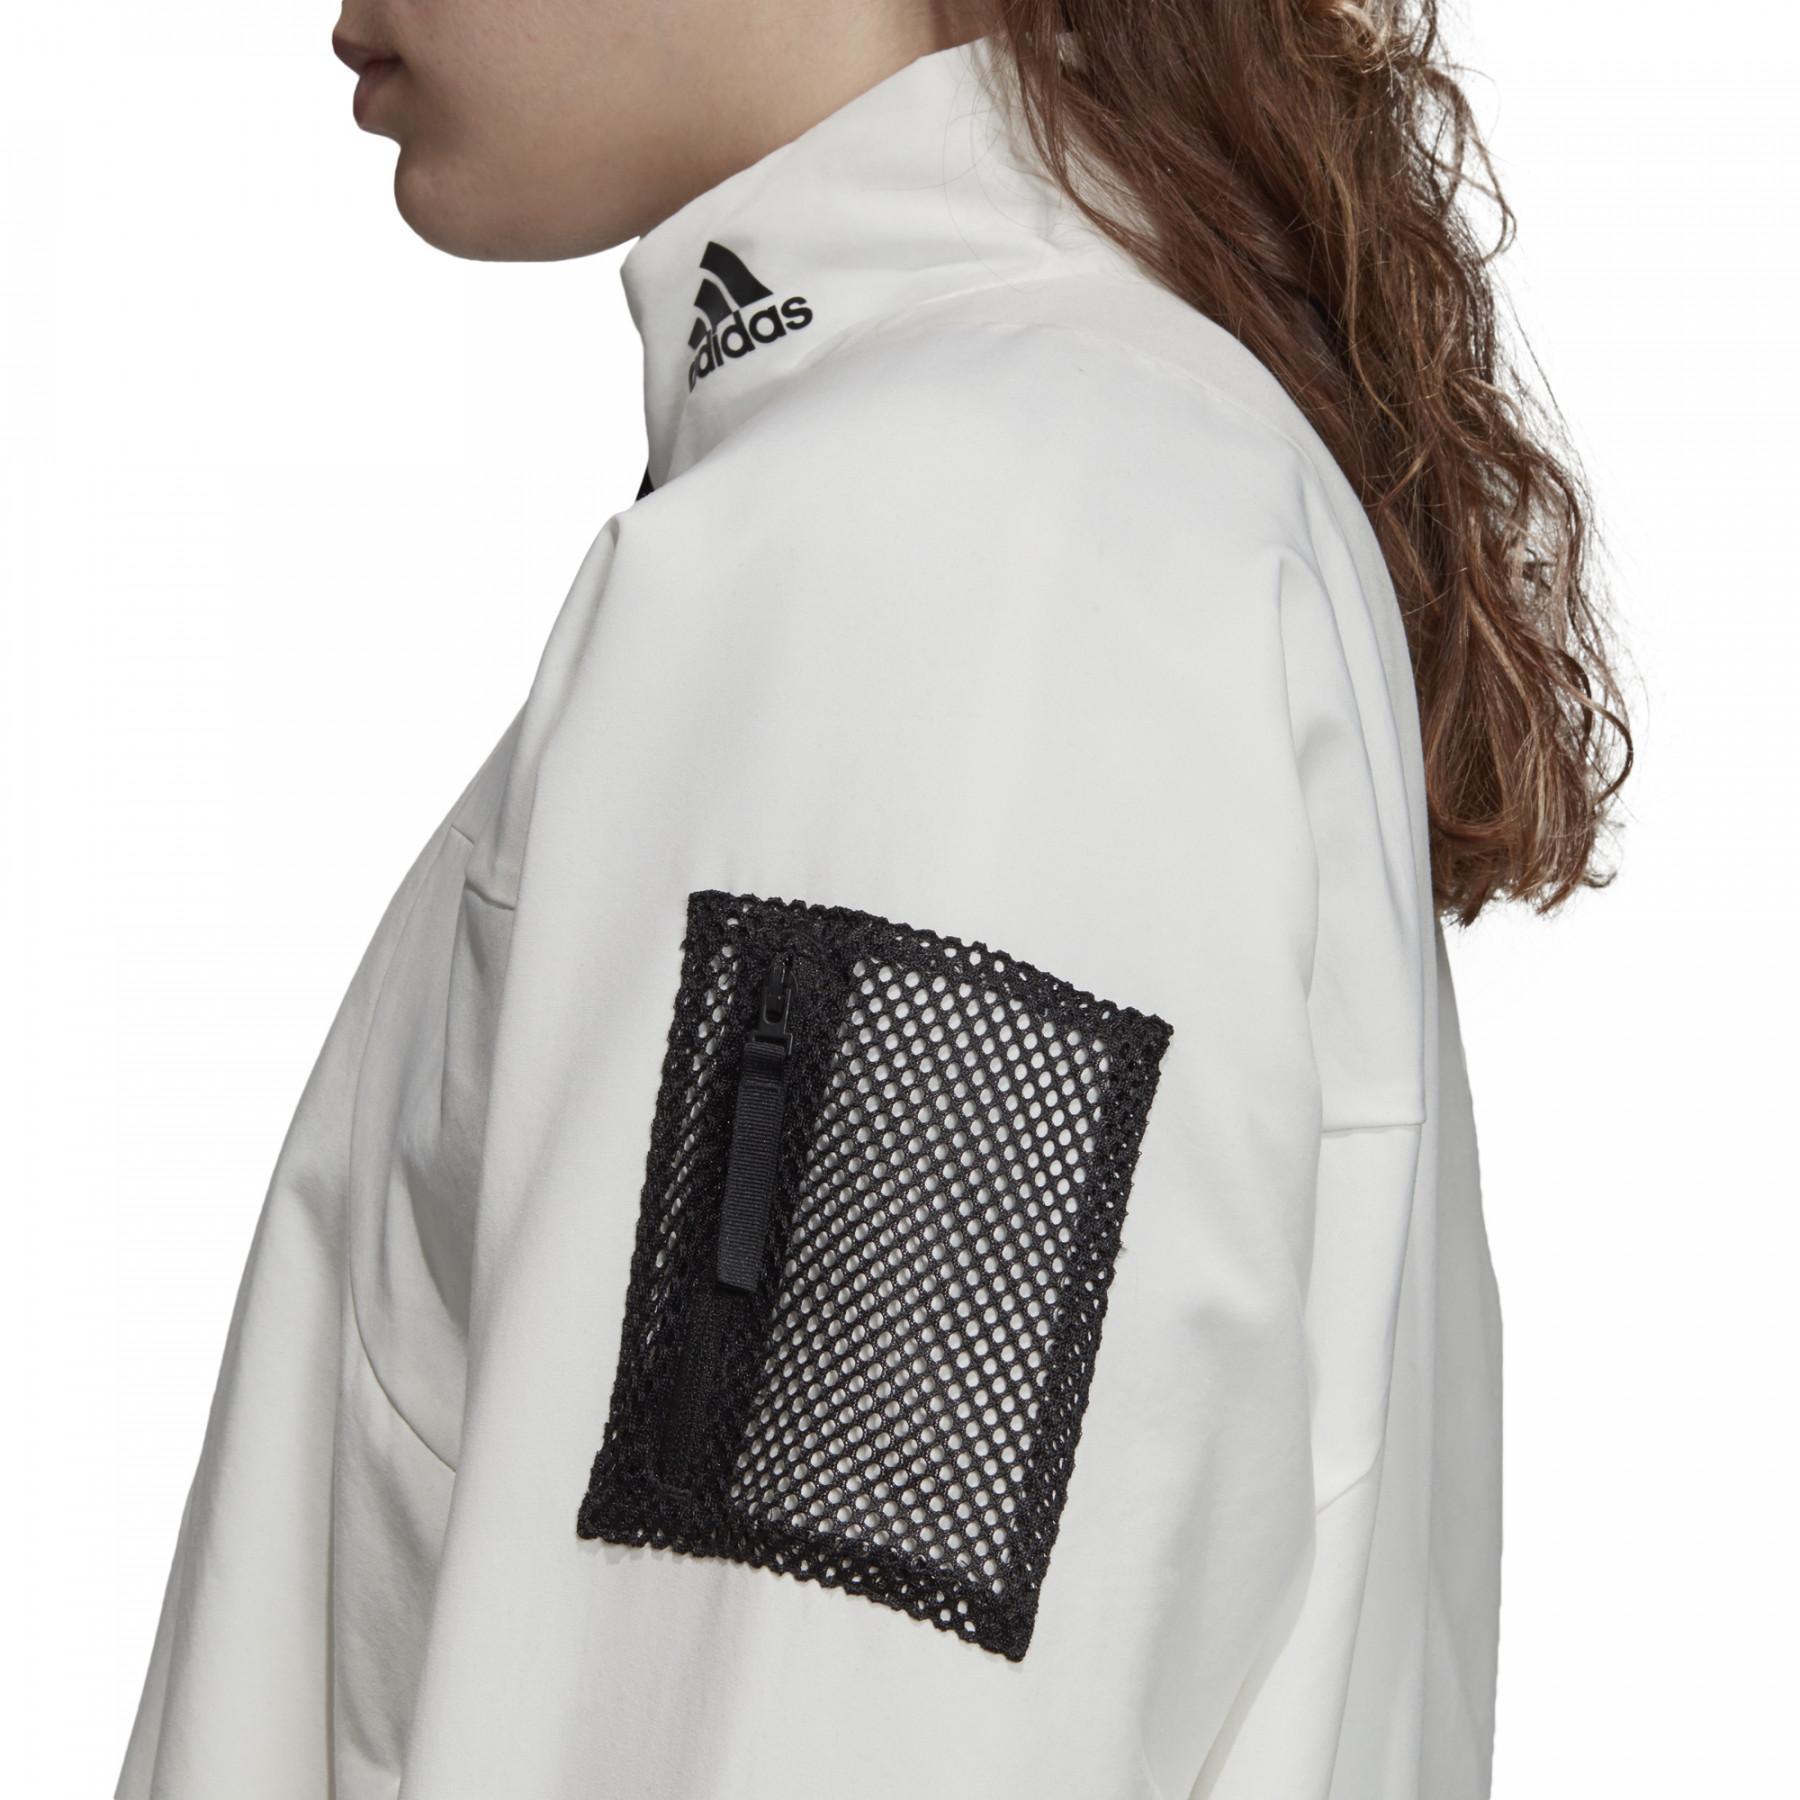 Women's jacket adidas Back-to-Sport Lined Insulation